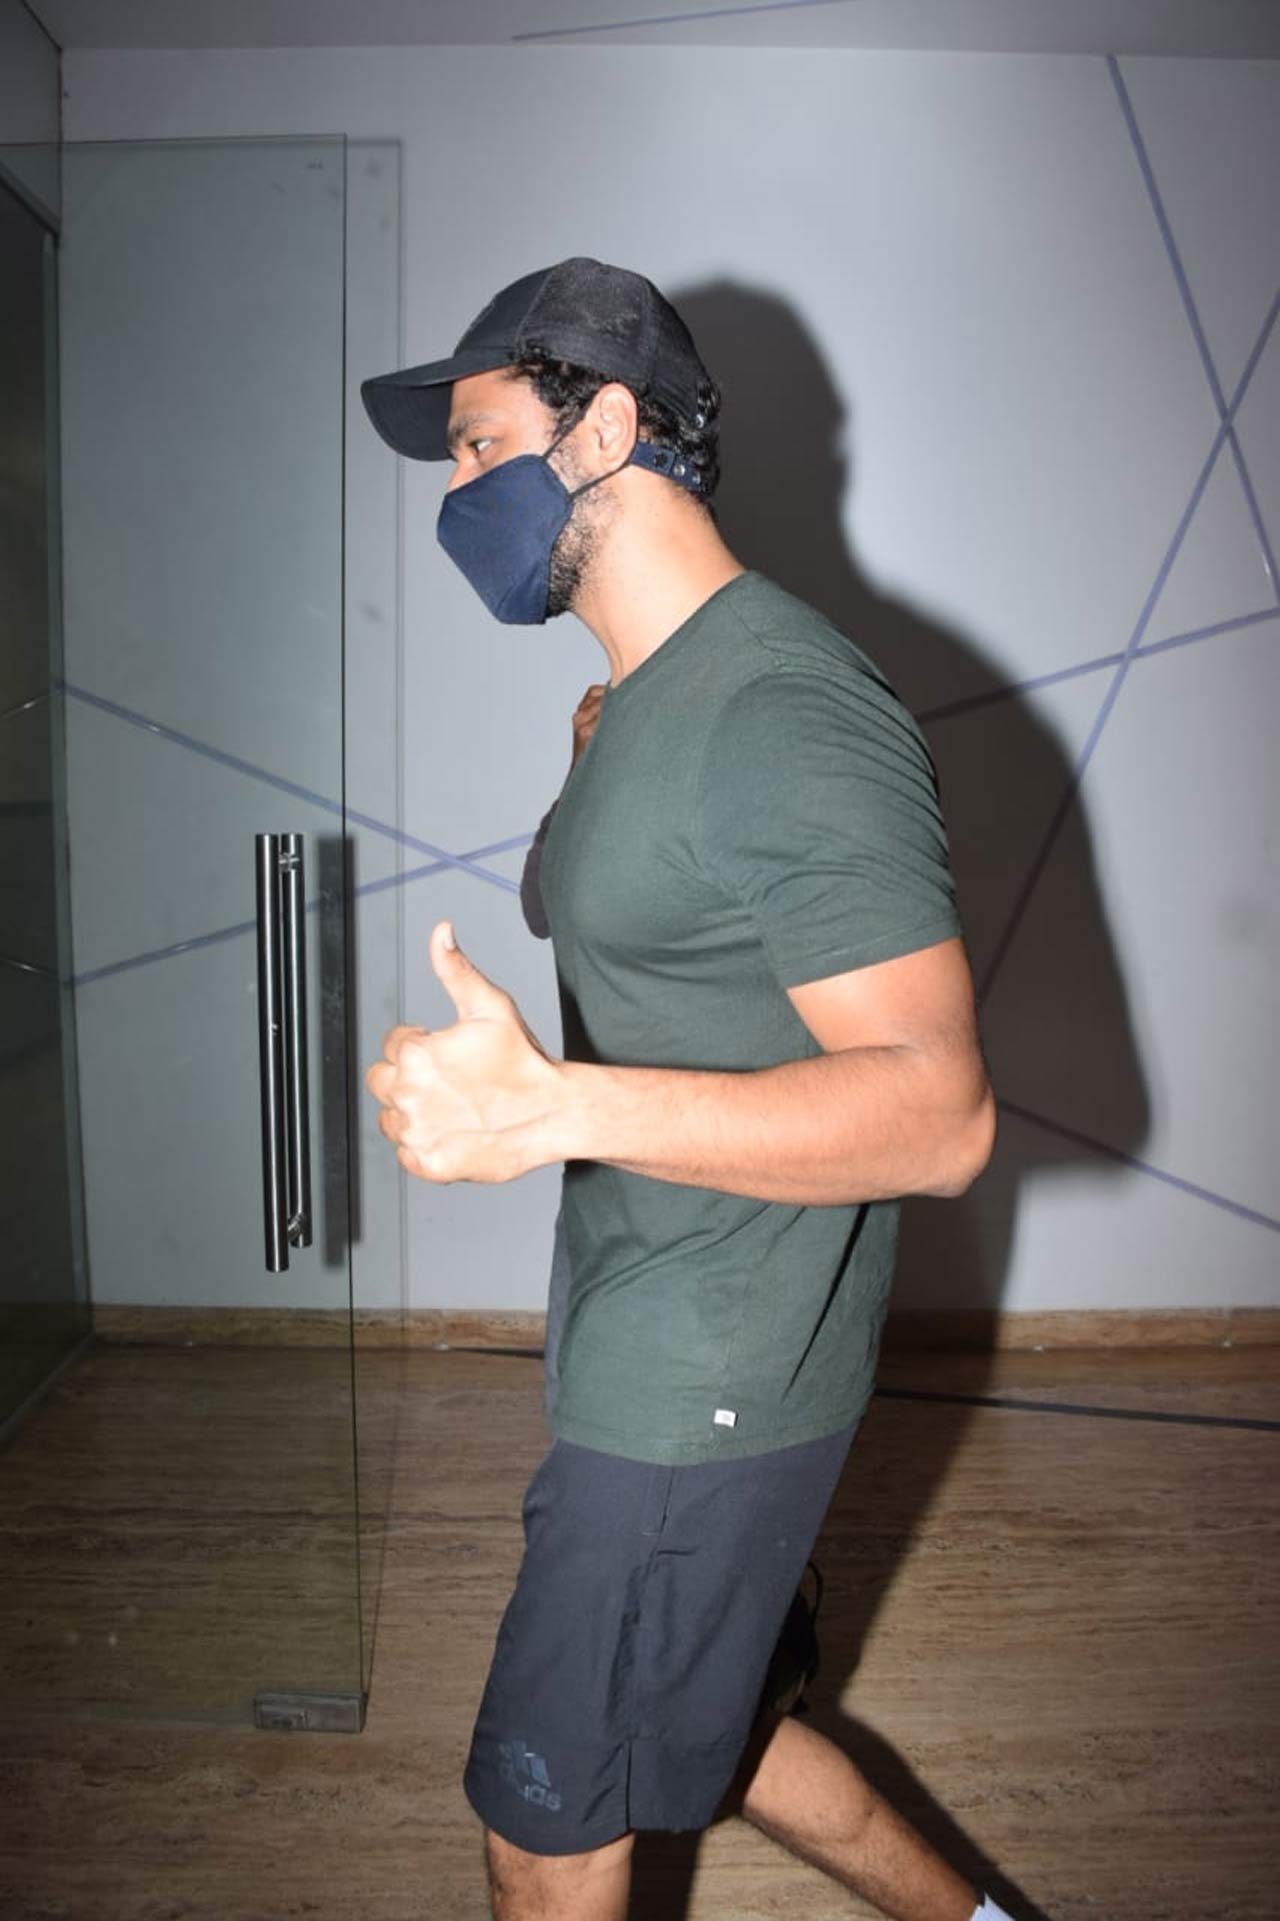 Vicky Kaushal was seen wearing a grey coloured t-shirt, paired with black shorts and sports shoes. Though Katrina was snapped in her car, the actress was also seen in black athleisure. Vicky Kaushal and Katrina Kaif are hitting the gym to look their best on their big day.